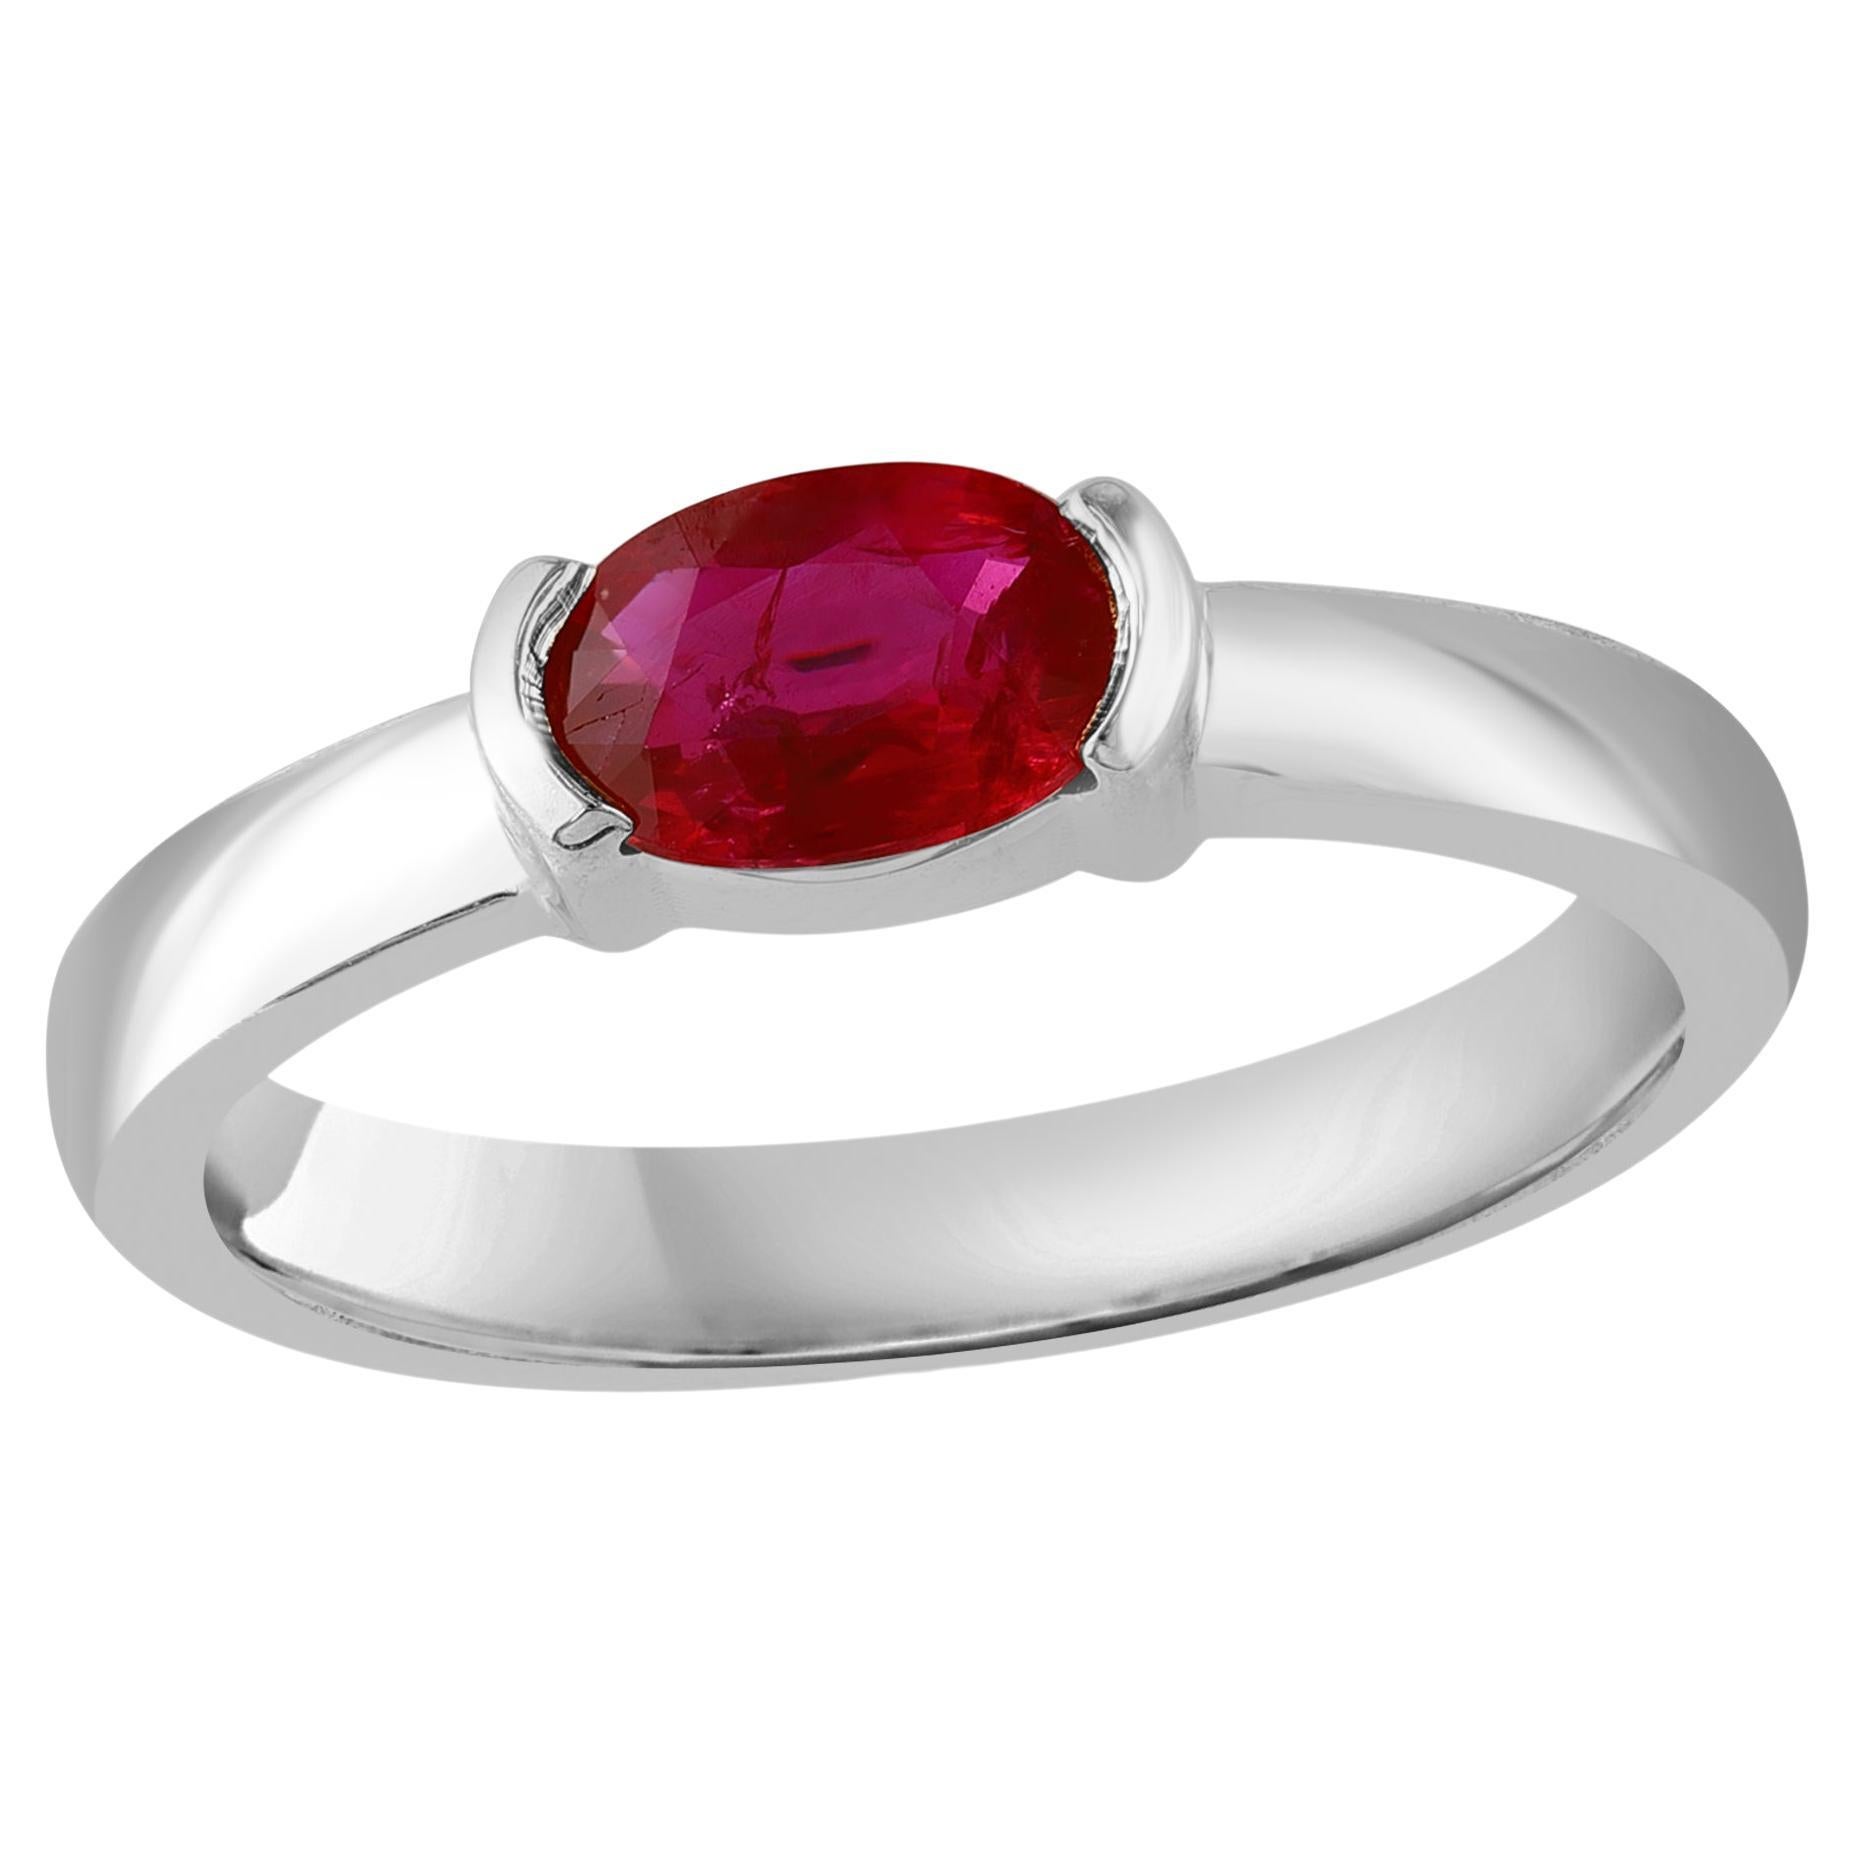 0.78 Carat Oval Cut Ruby Band Ring in 14K White Gold For Sale